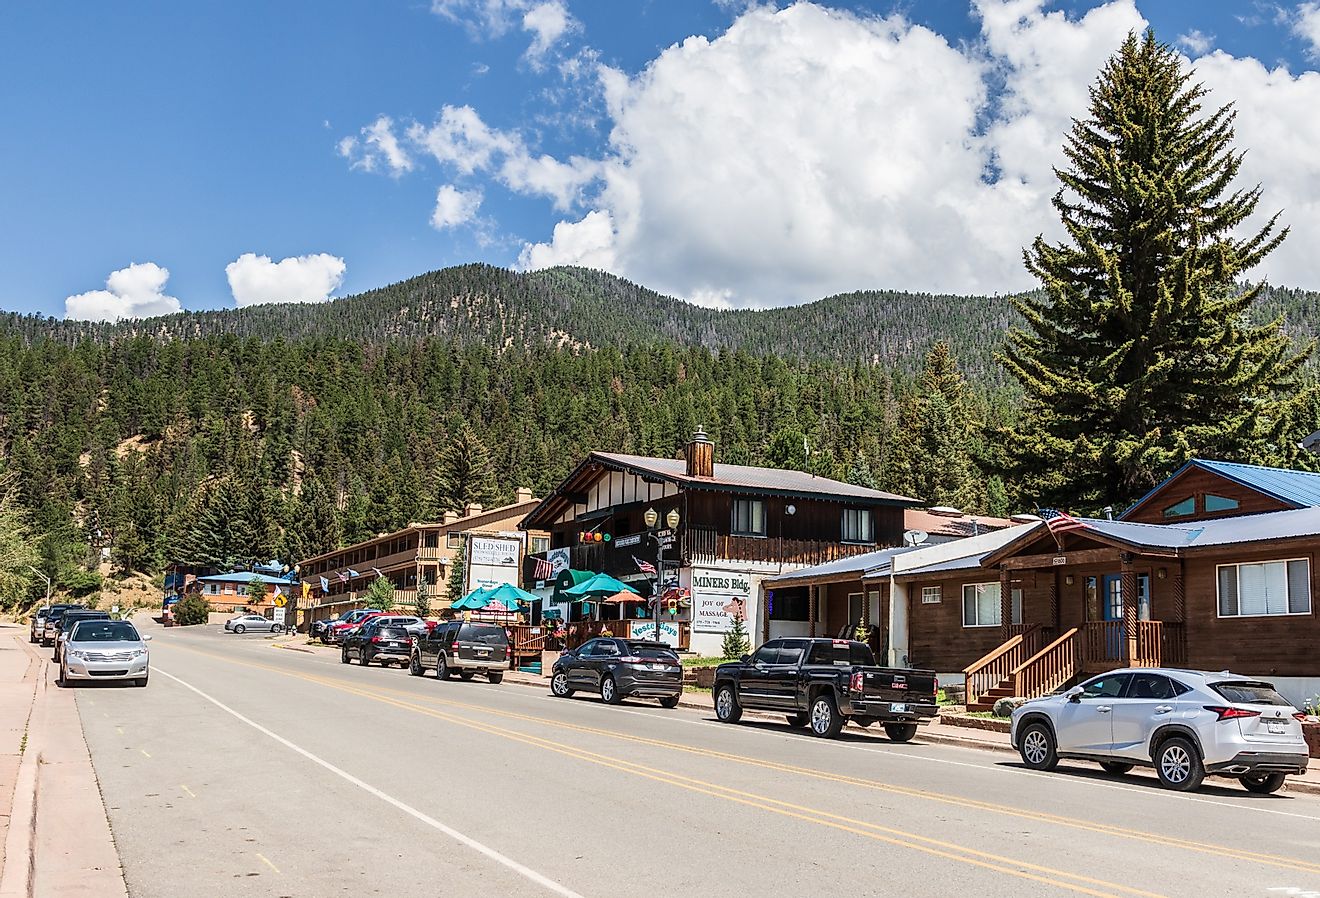 Main Street of Red River, with mountains in background. Image credit Nolichuckyjake via Shutterstock